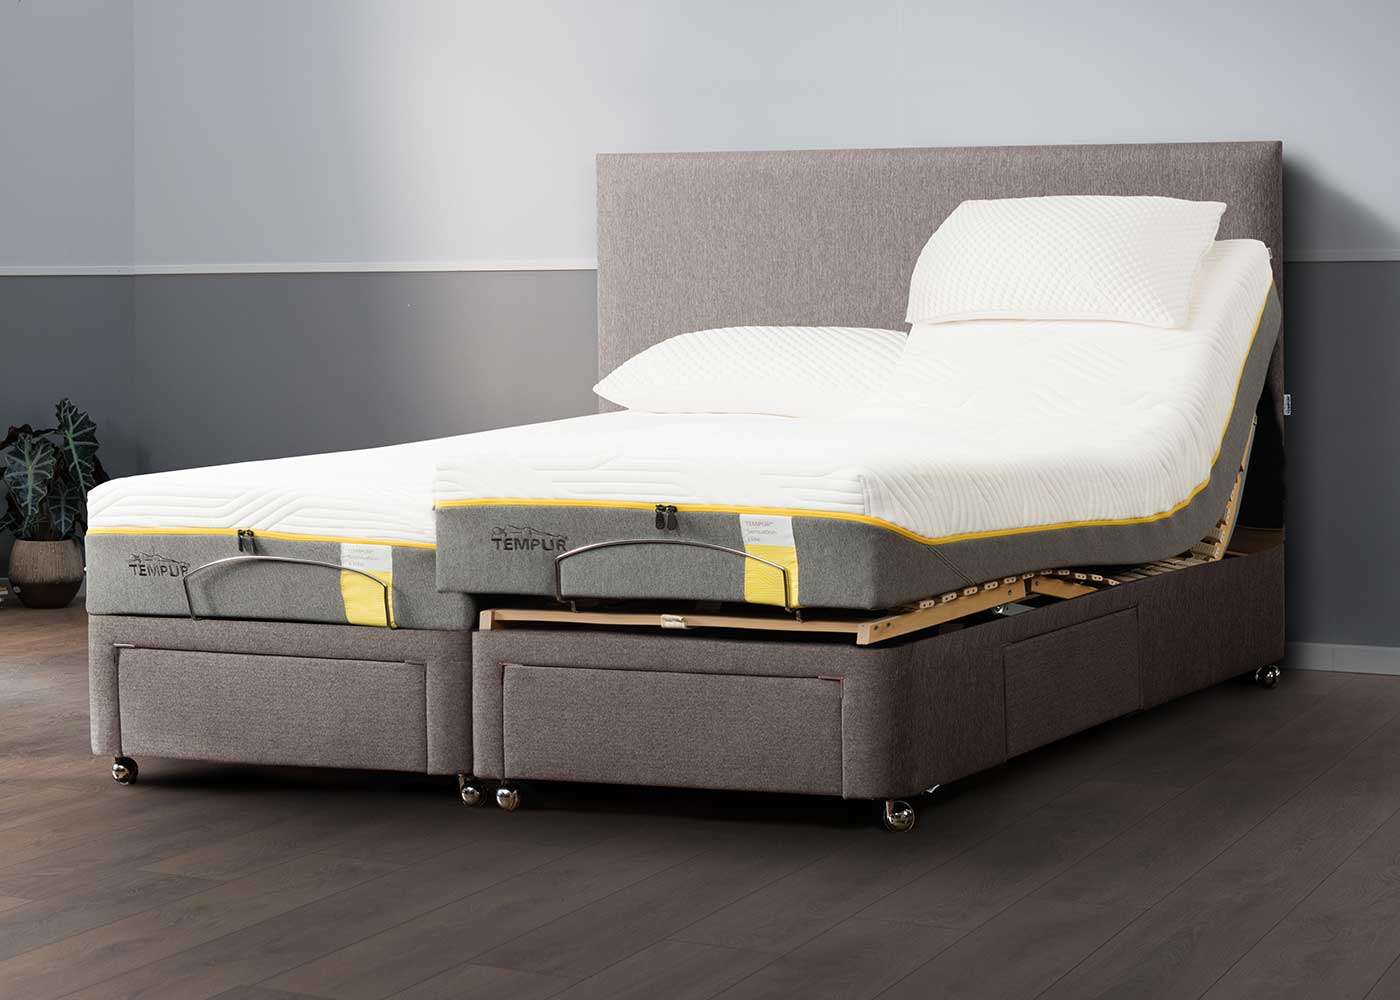 King Size Tempur Adjustable Bed, Cost Of Adjustable King Size Bed